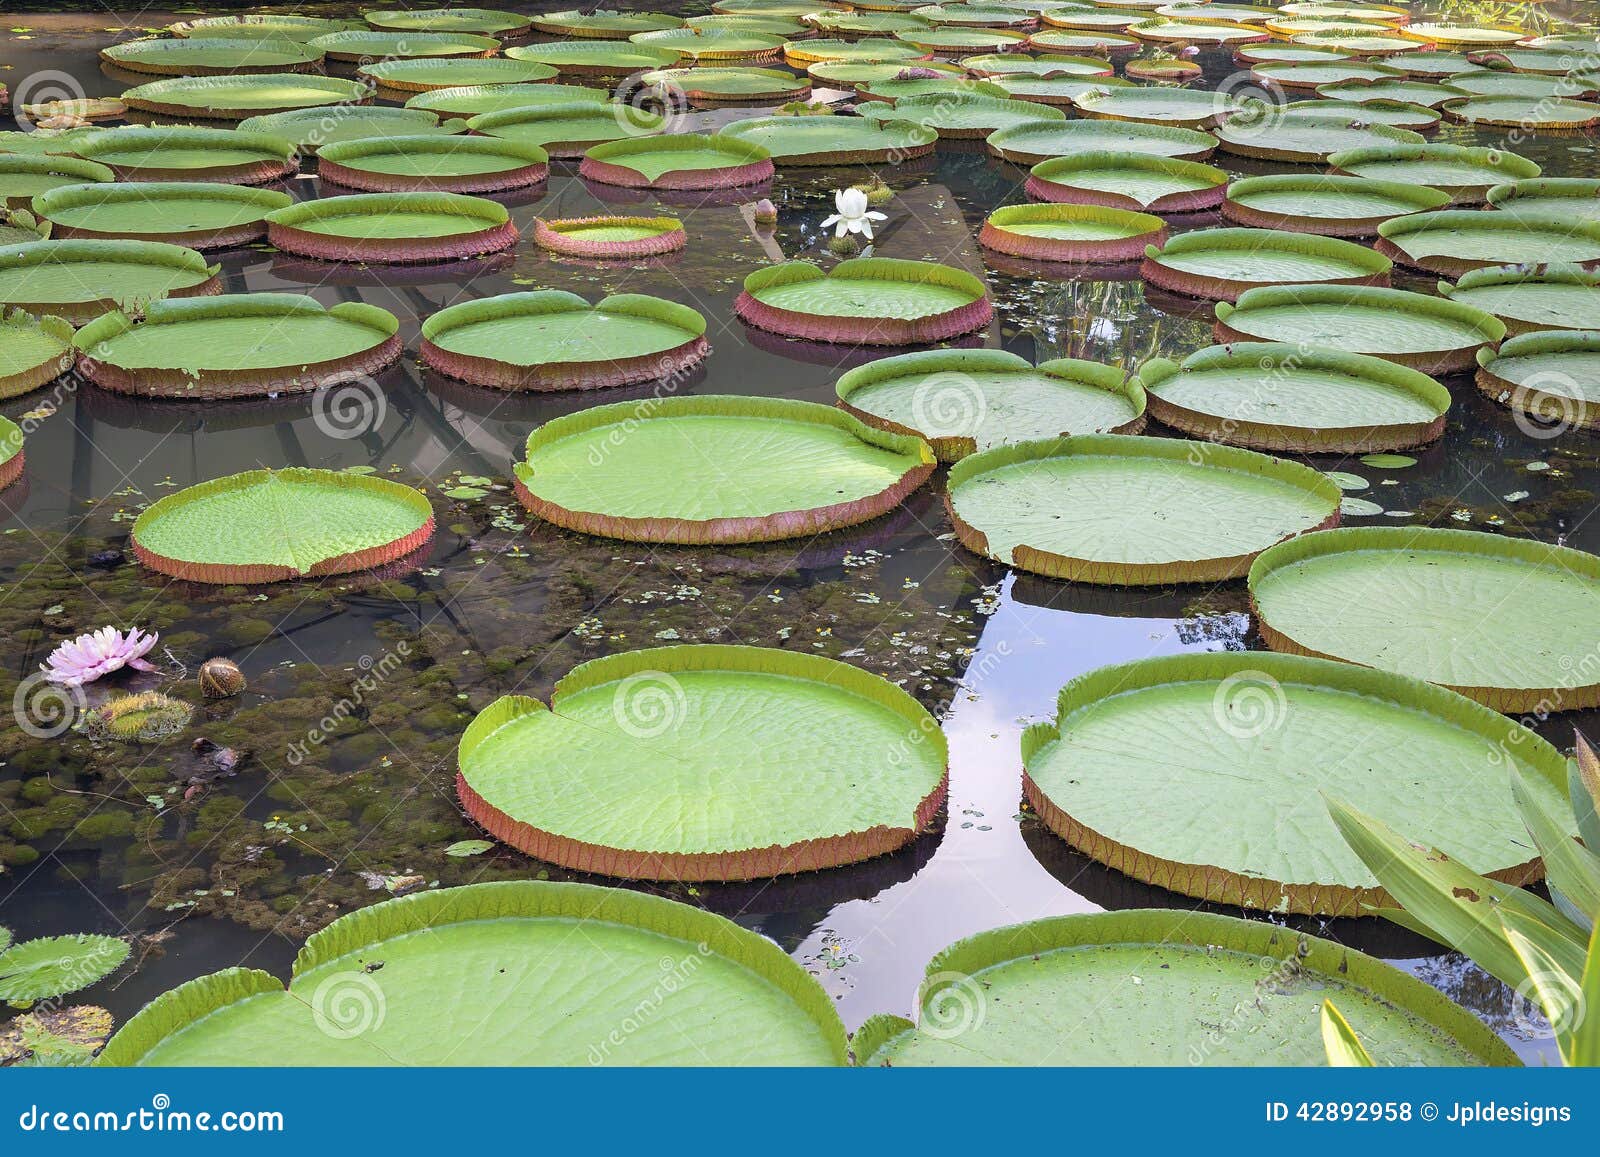 giant amazonian water lily pads